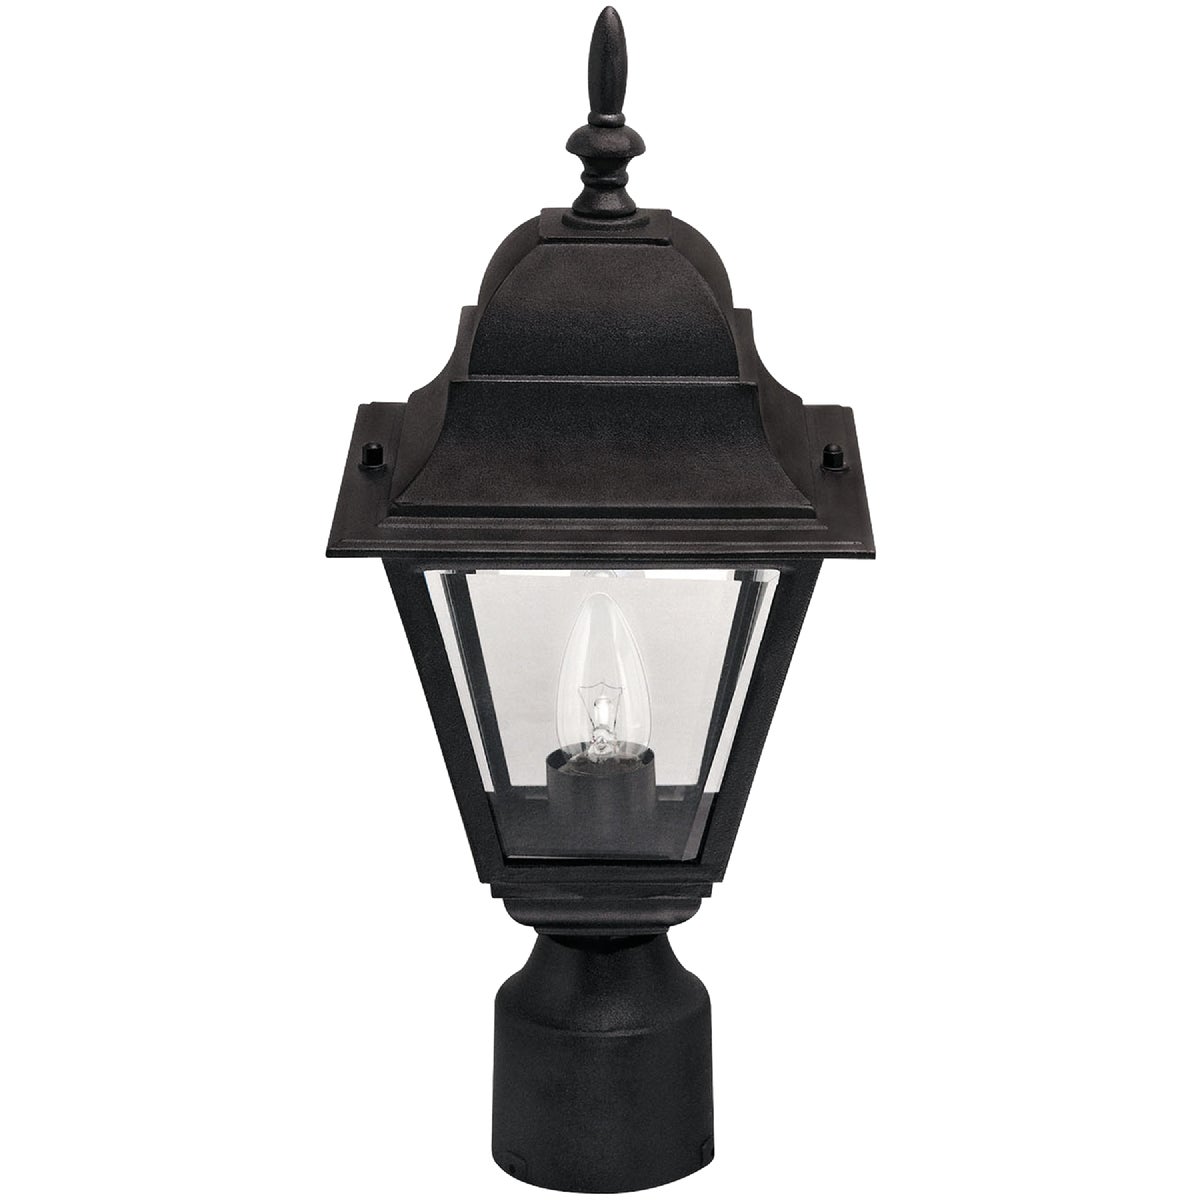 Item 500376, Outdoor light fixture that fits over most 3-inch posts. Post not included.